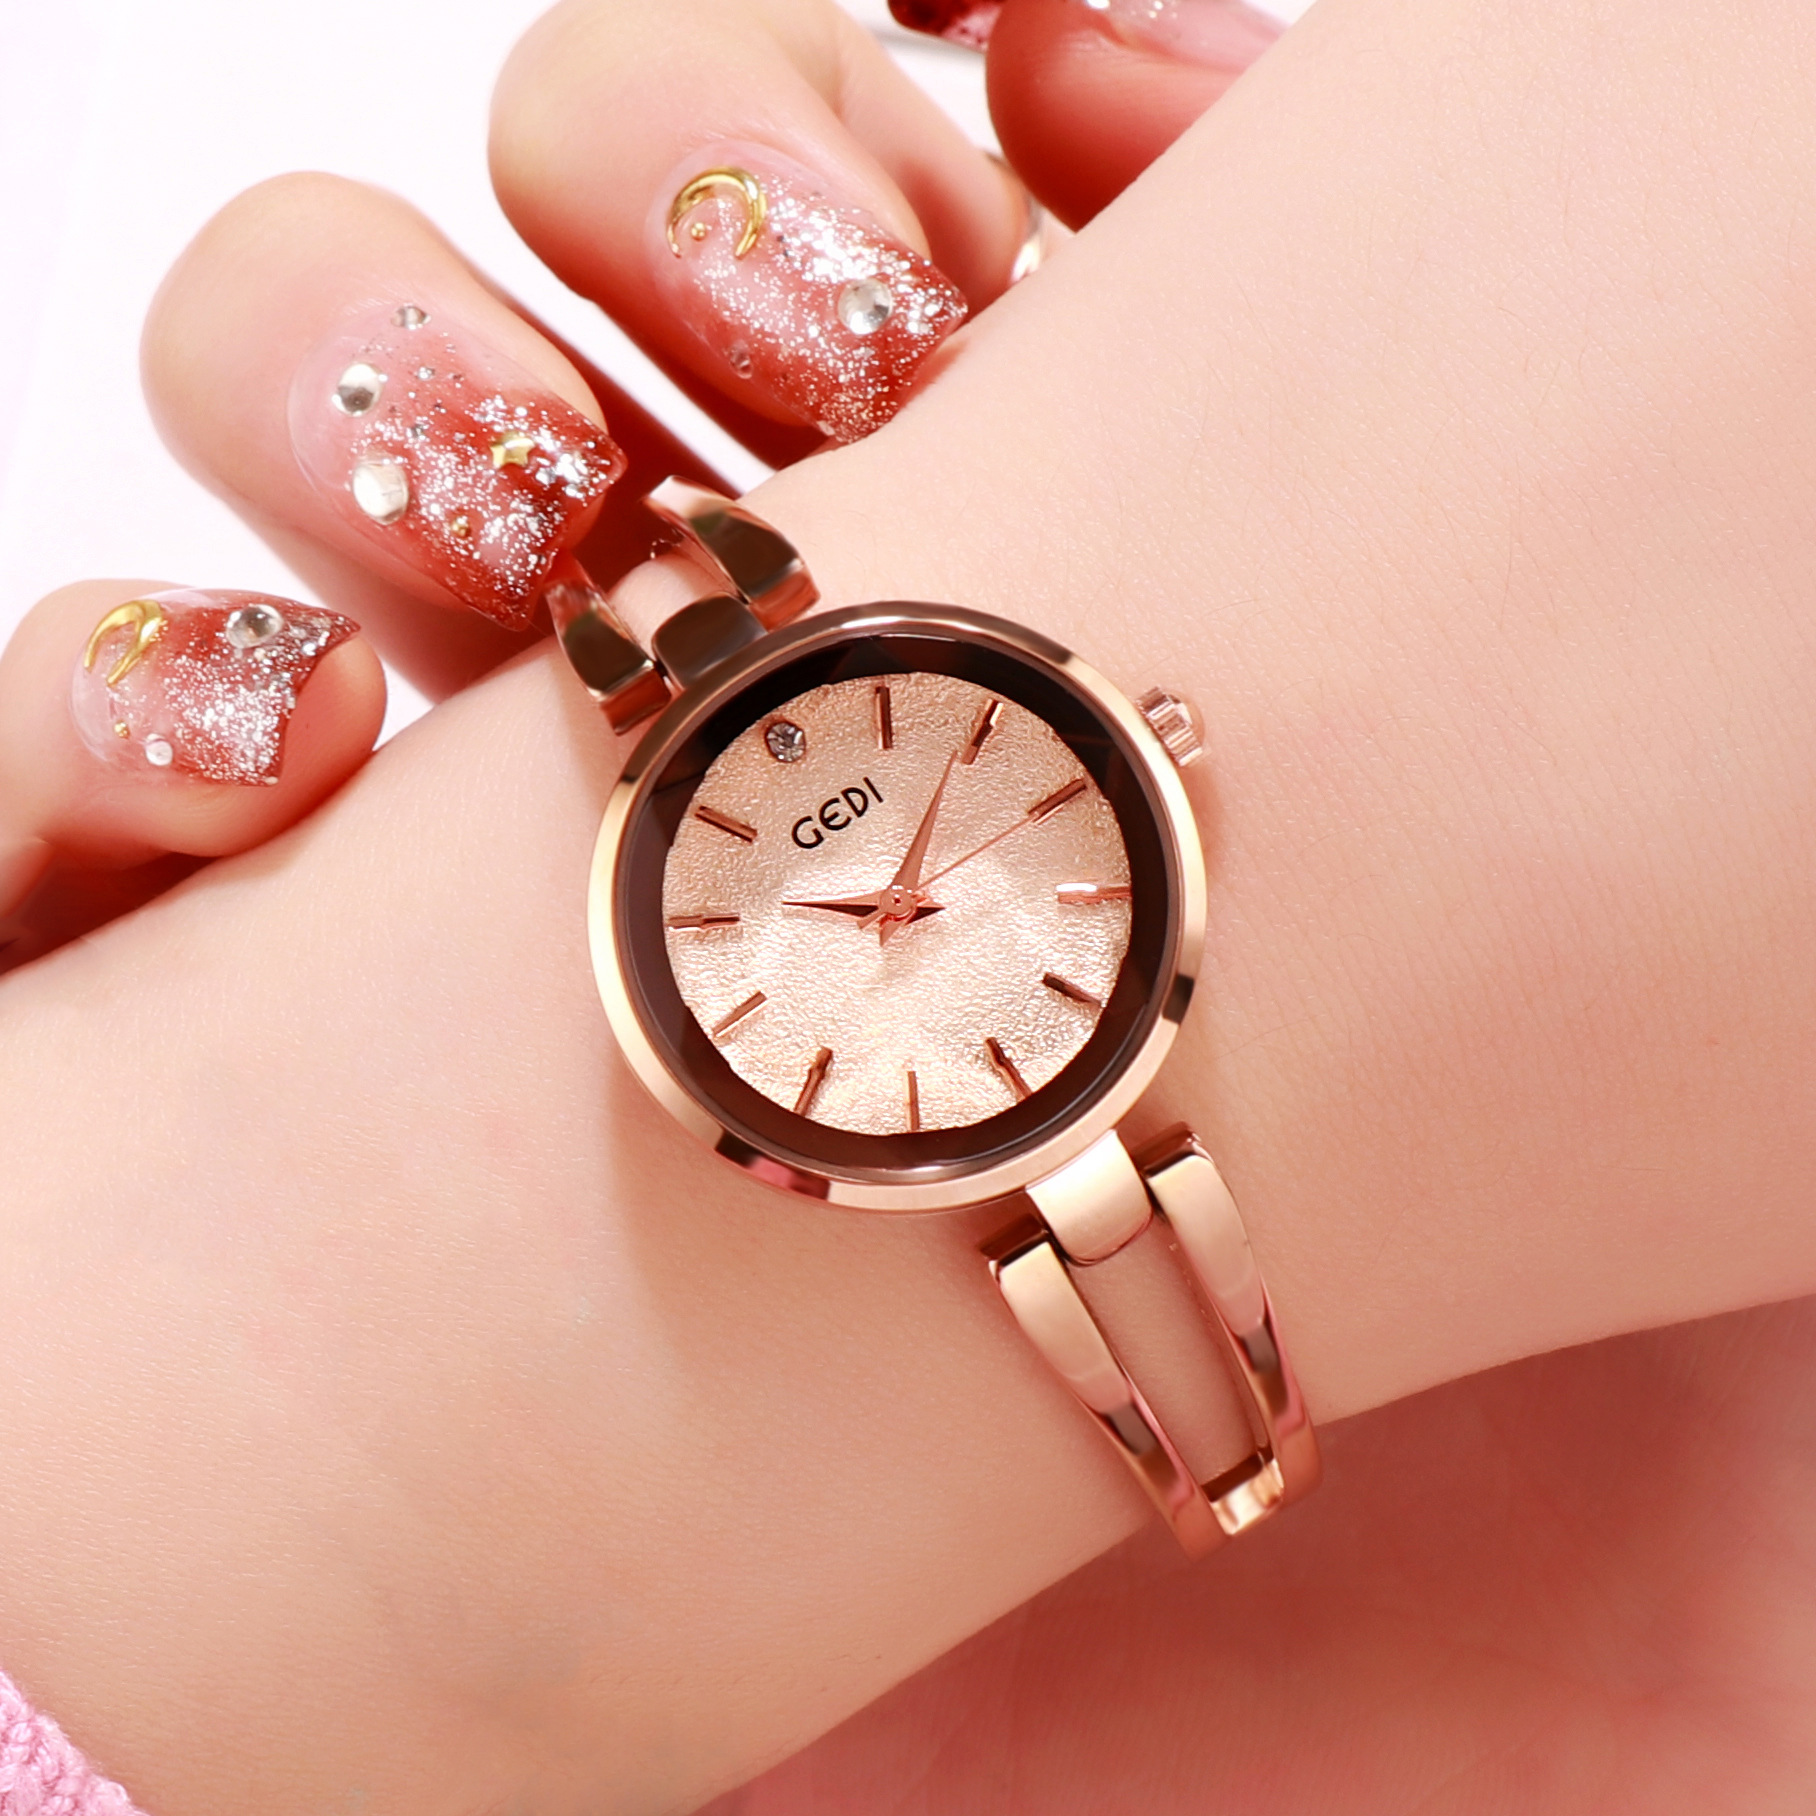 1:Rose Gold Shell Rose Gold Plate